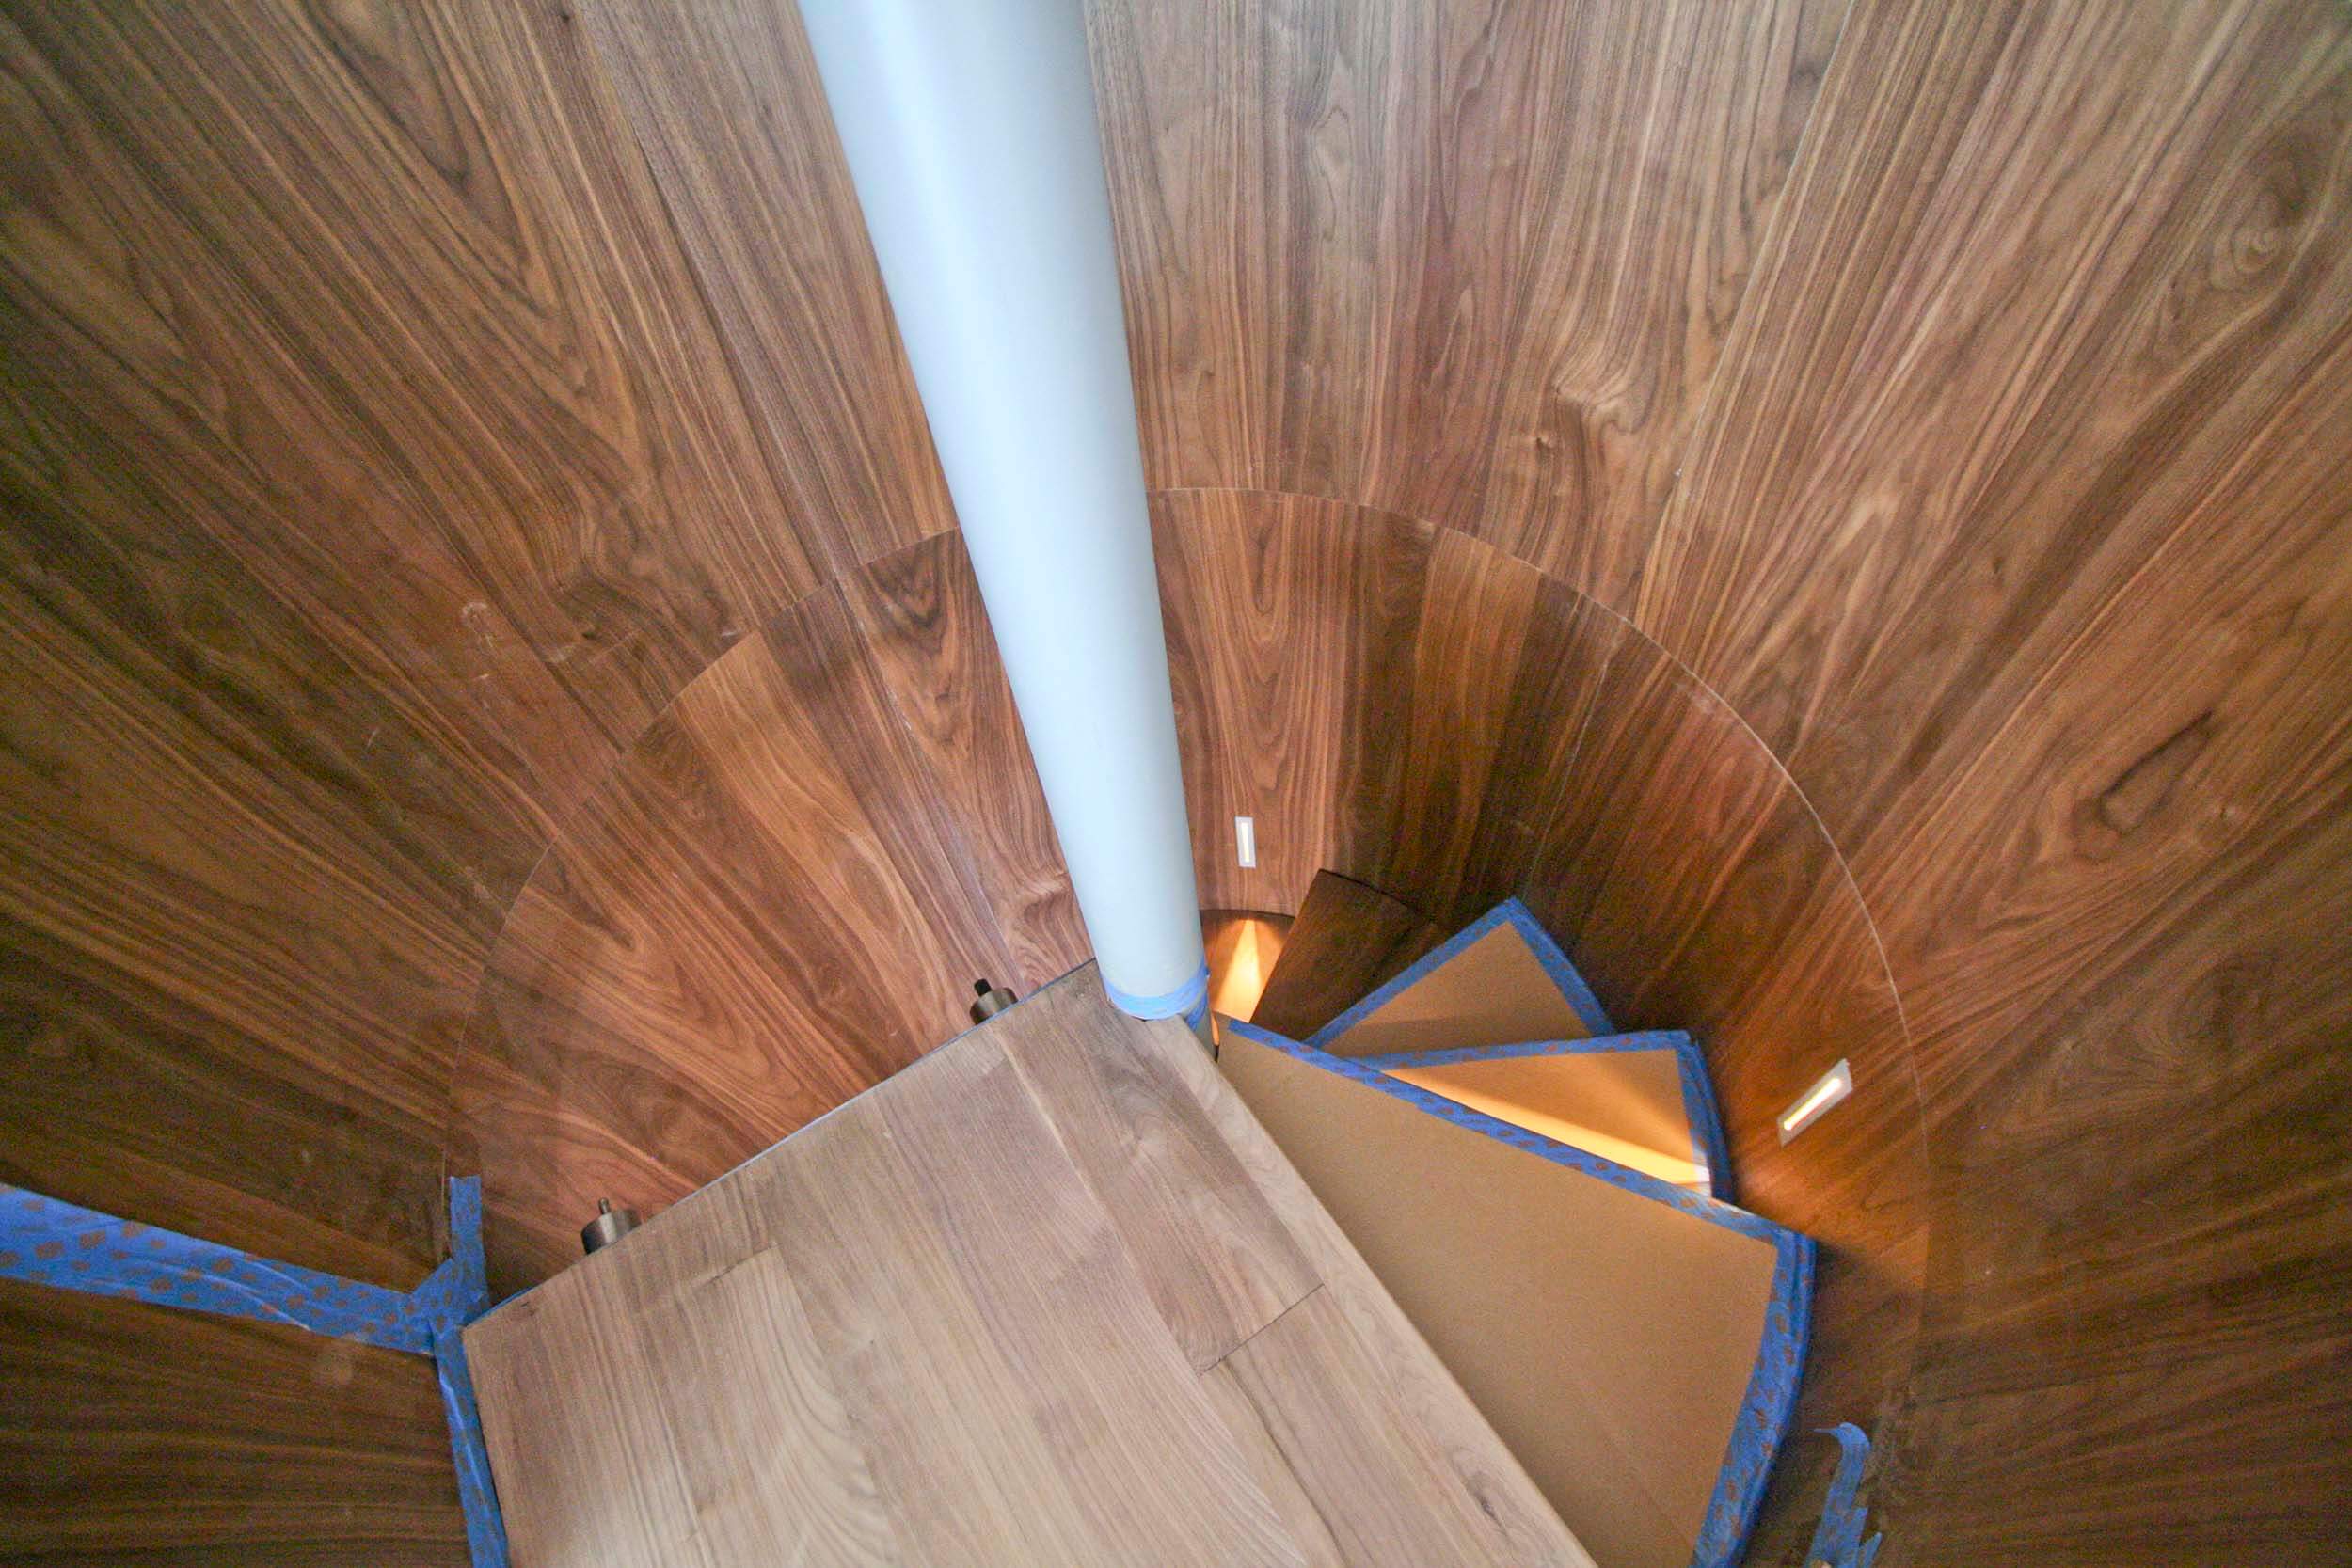   Walnut spiral stair &nbsp;nearly complete -&nbsp; Step lights create a nice accent  